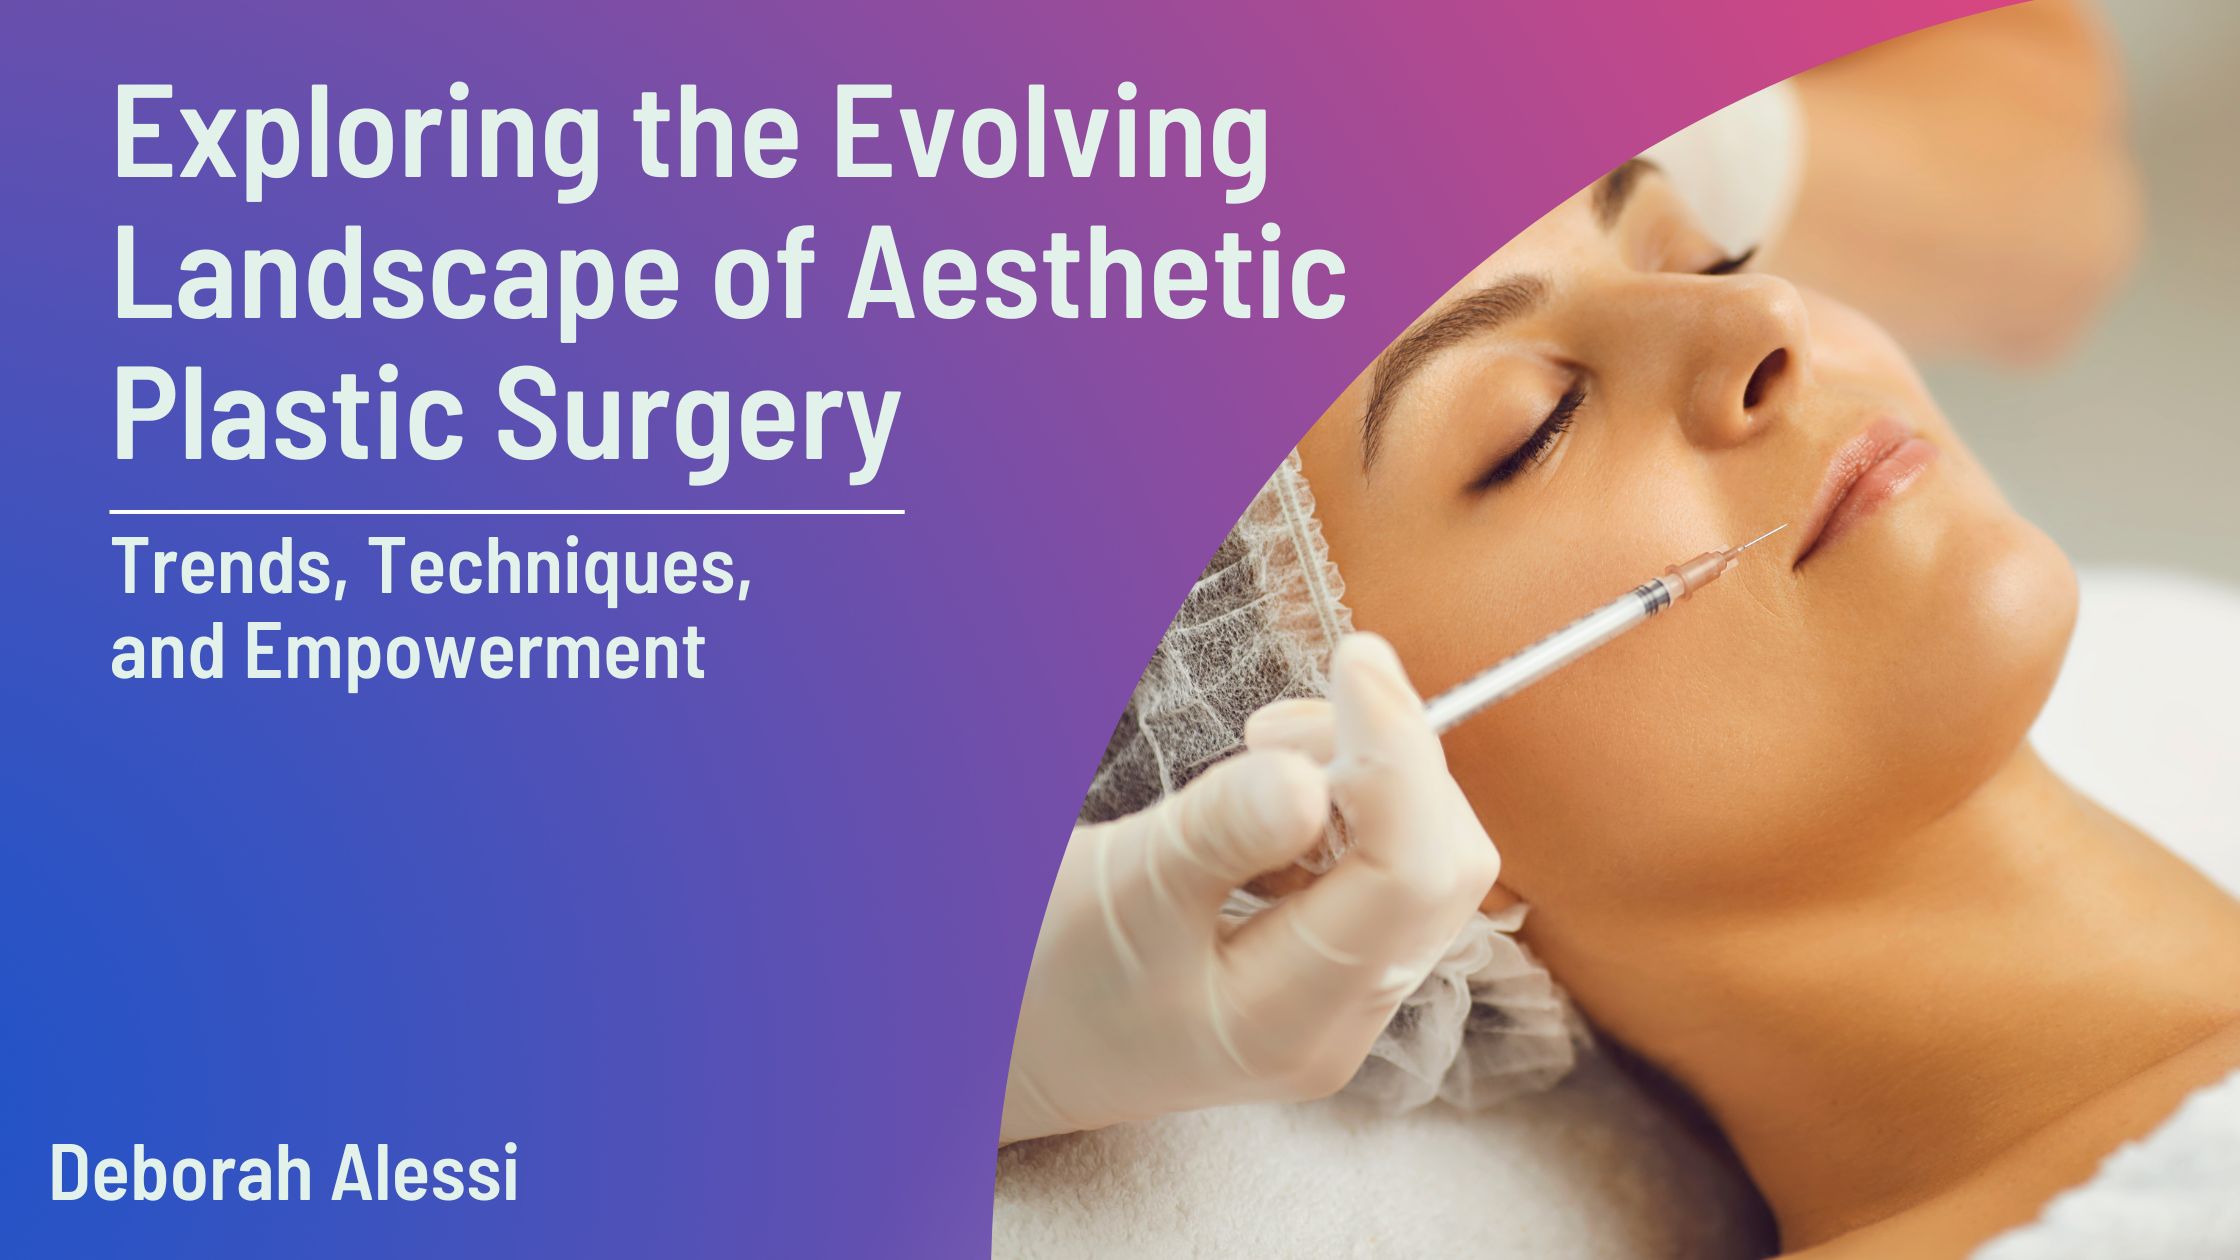 Exploring the Evolving Landscape of Aesthetic Plastic Surgery: Trends, Techniques, and Empowerment